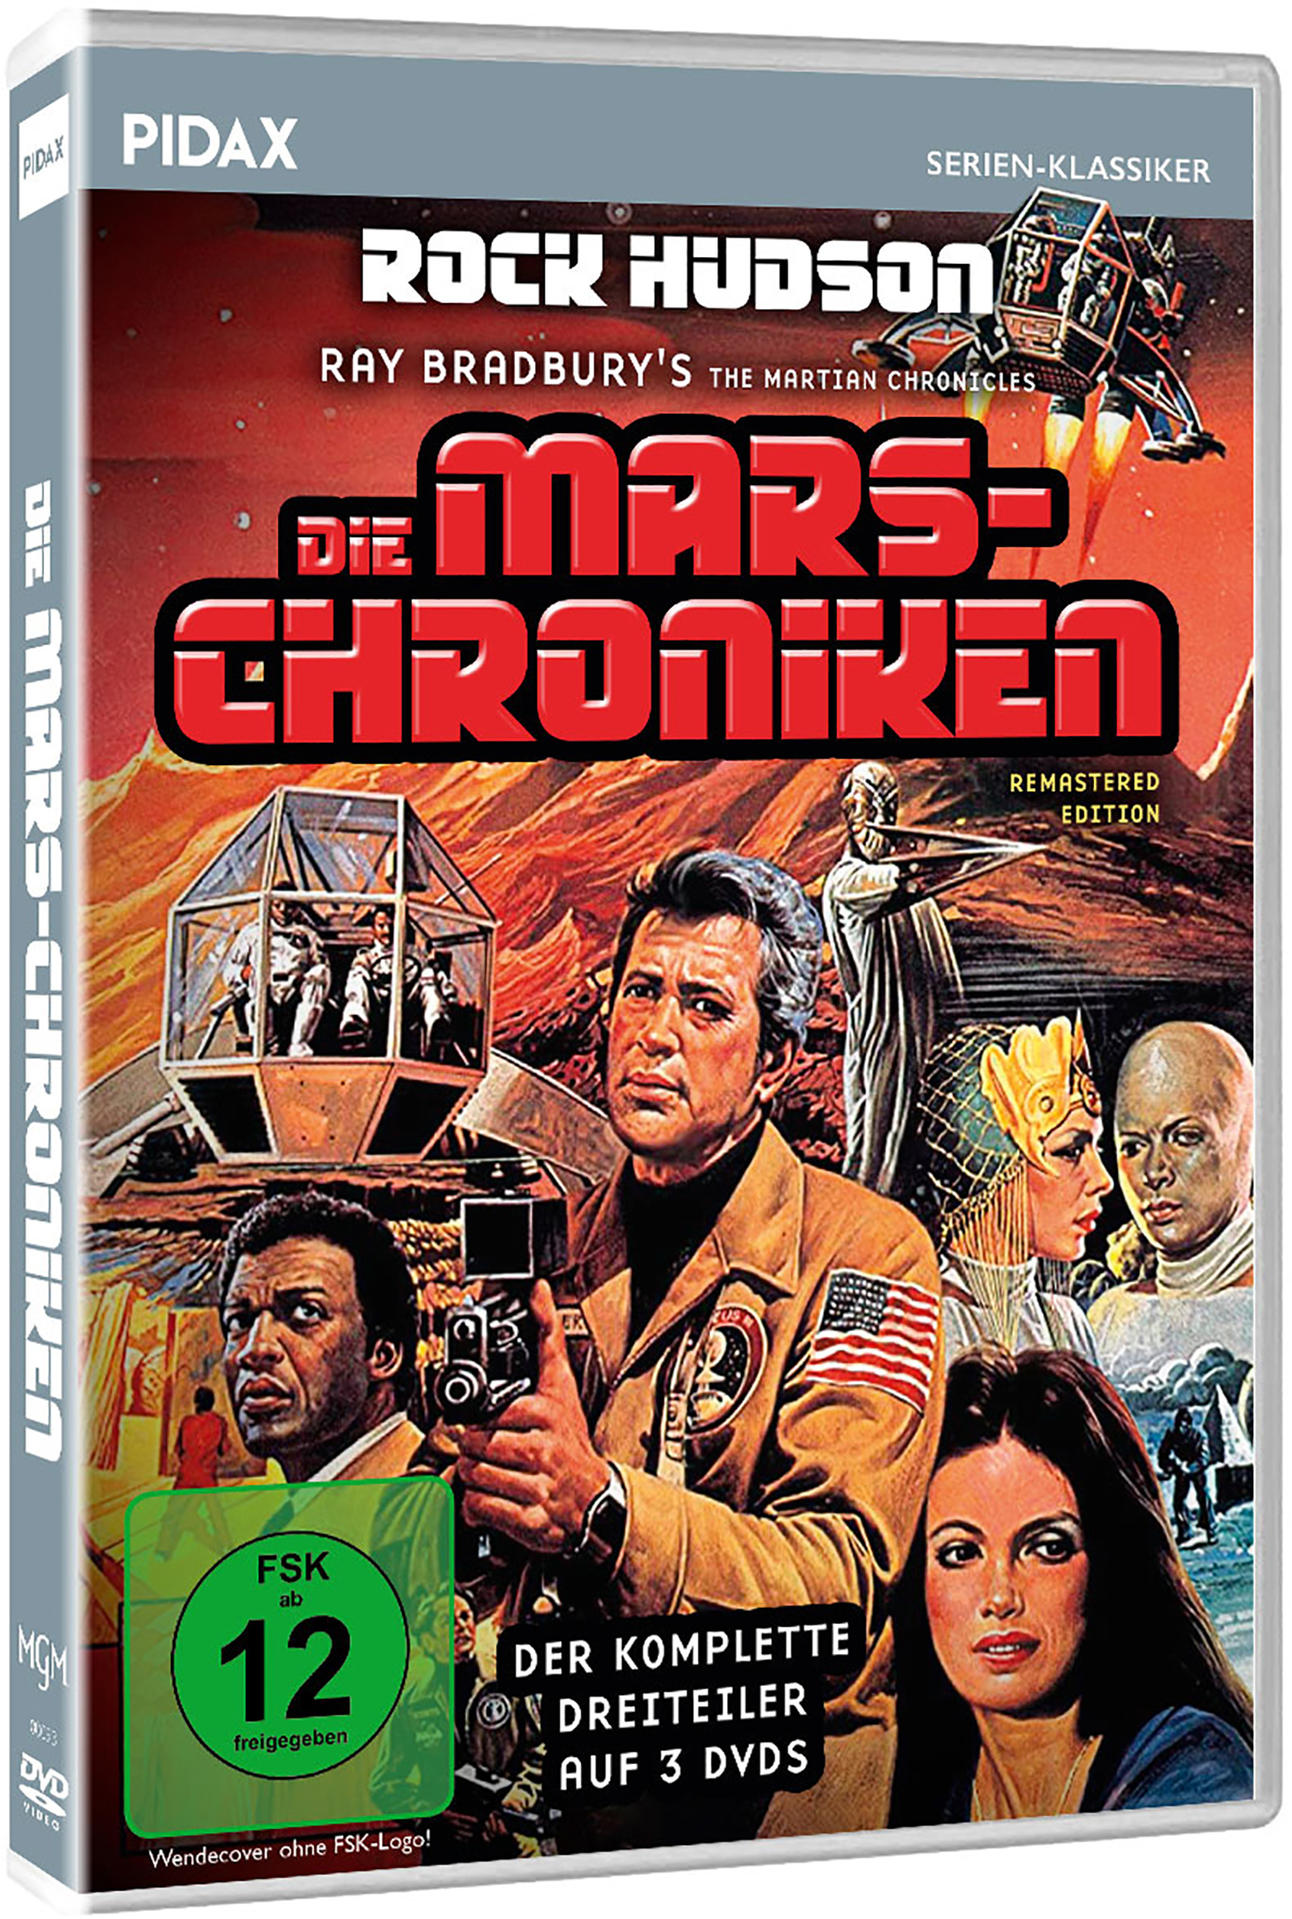 Die Mars-Chroniken (The Martian Chronicles) - Edition DVD Remastered